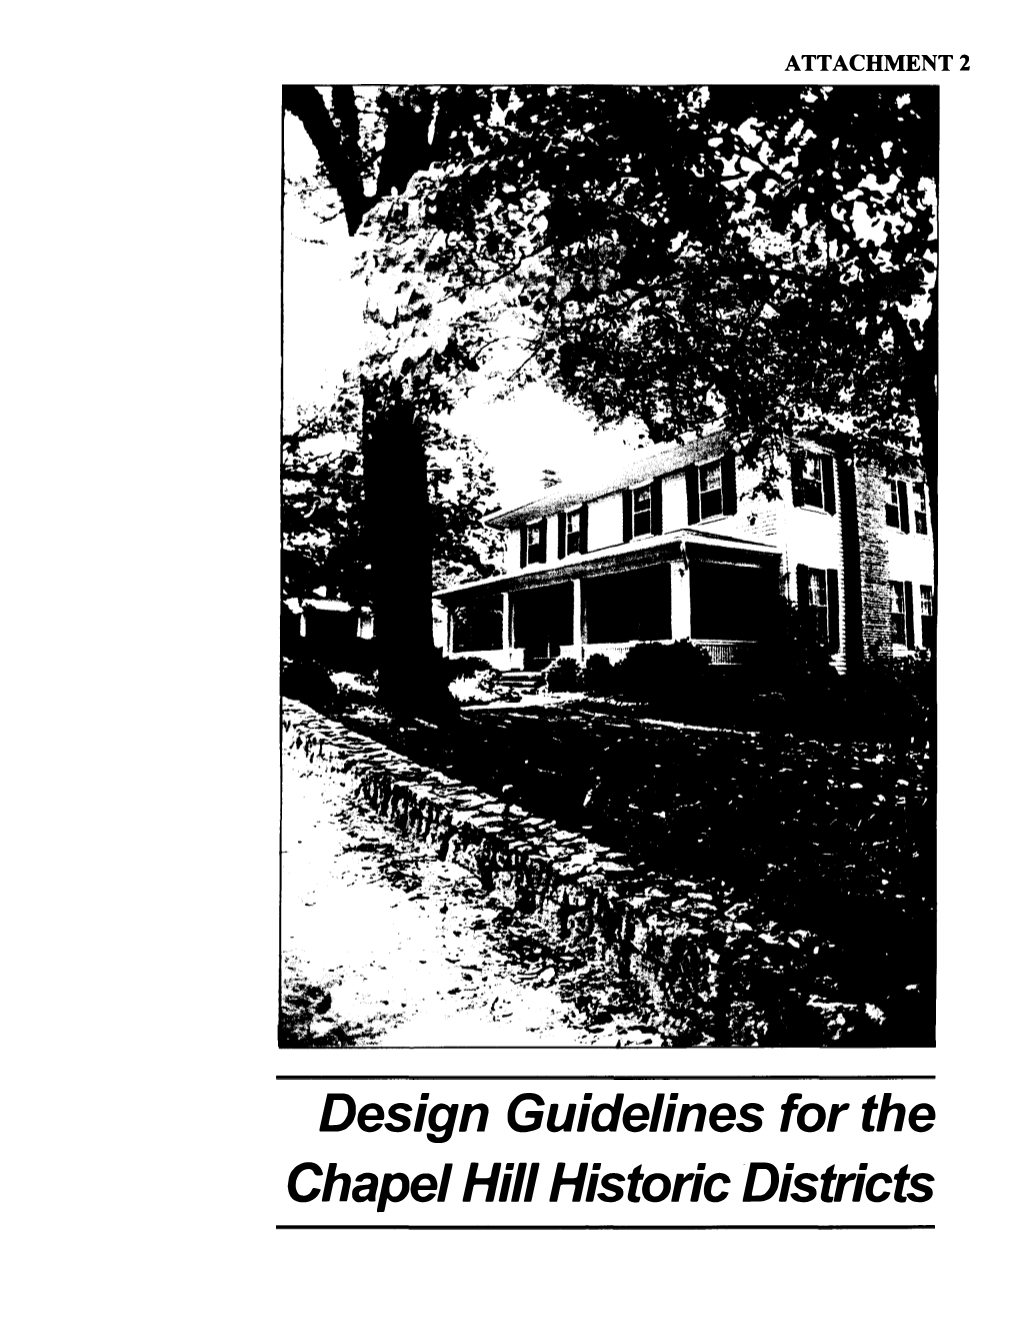 Design Guidelines for the Chapel Hill Historic Districts Chapel Hill Historic District Commission Design Guidelines Sub-Committee James H